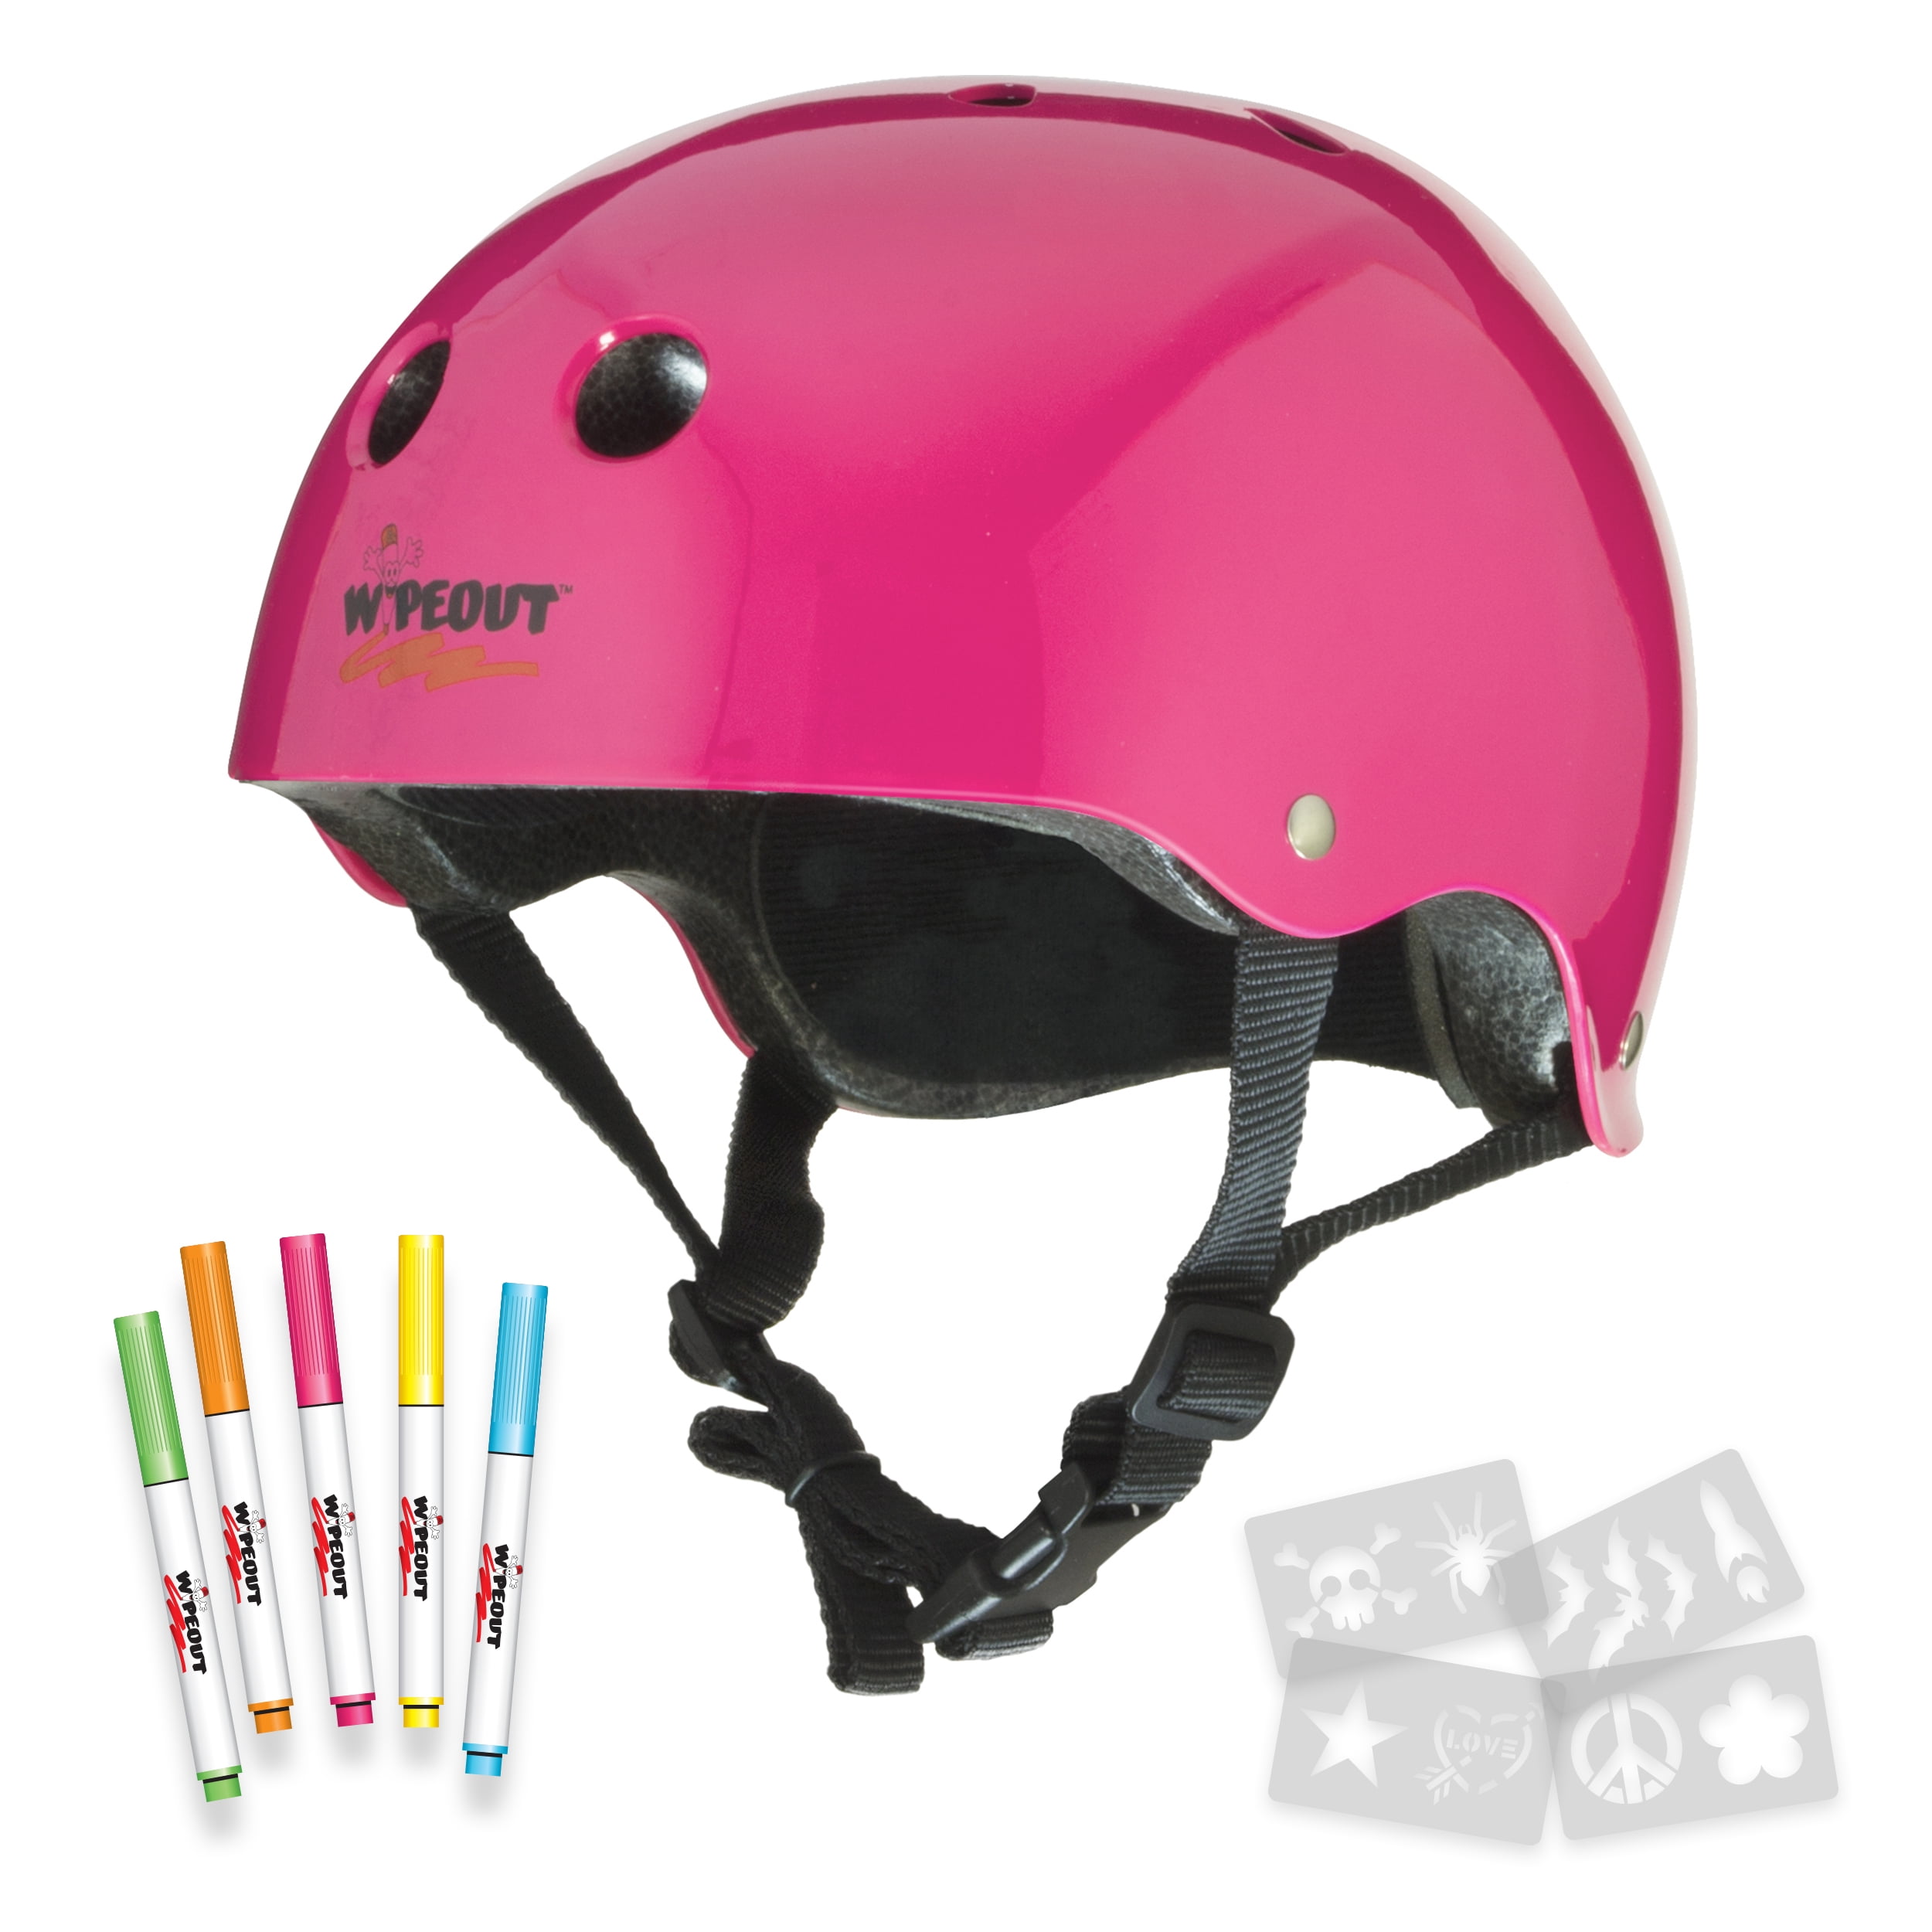 SMALL Outdoor Toys Sporting Goods BN Micro Scooters GLOSSY NEON PINK HELMET 